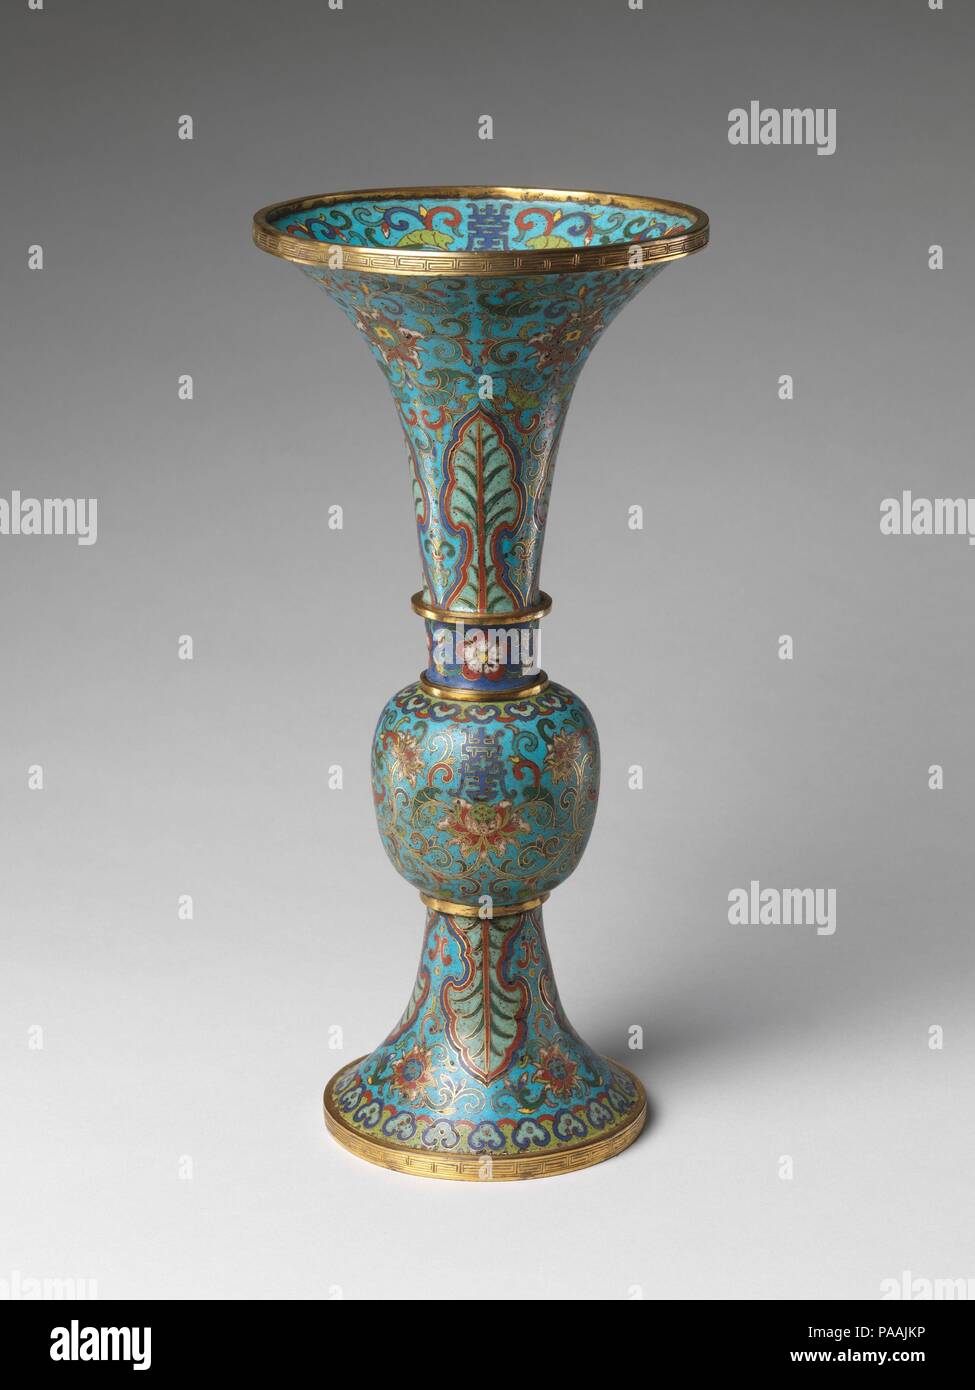 Vase from a Set of Five-Piece Altar Set (Wugong). Culture: China. Dimensions: H. 13 in. (33 cm); Diam. of rim 6 1/8 in. (15.6 cm); Diam. of foot 4 5/8 in. (11.7 cm). Date: 18th century.  Cloisonné is the technique of creating designs on metal vessels with colored glass paste placed within enclosures made of copper or bronze wires, which have been bent or hammered into the desired patterns. Known as cloisons (French for 'partitions'), the enclosures are generally either glued or soldered onto the metal body. The glass paste, or enamel--which gets its color from metallic oxides--is painted into  Stock Photo